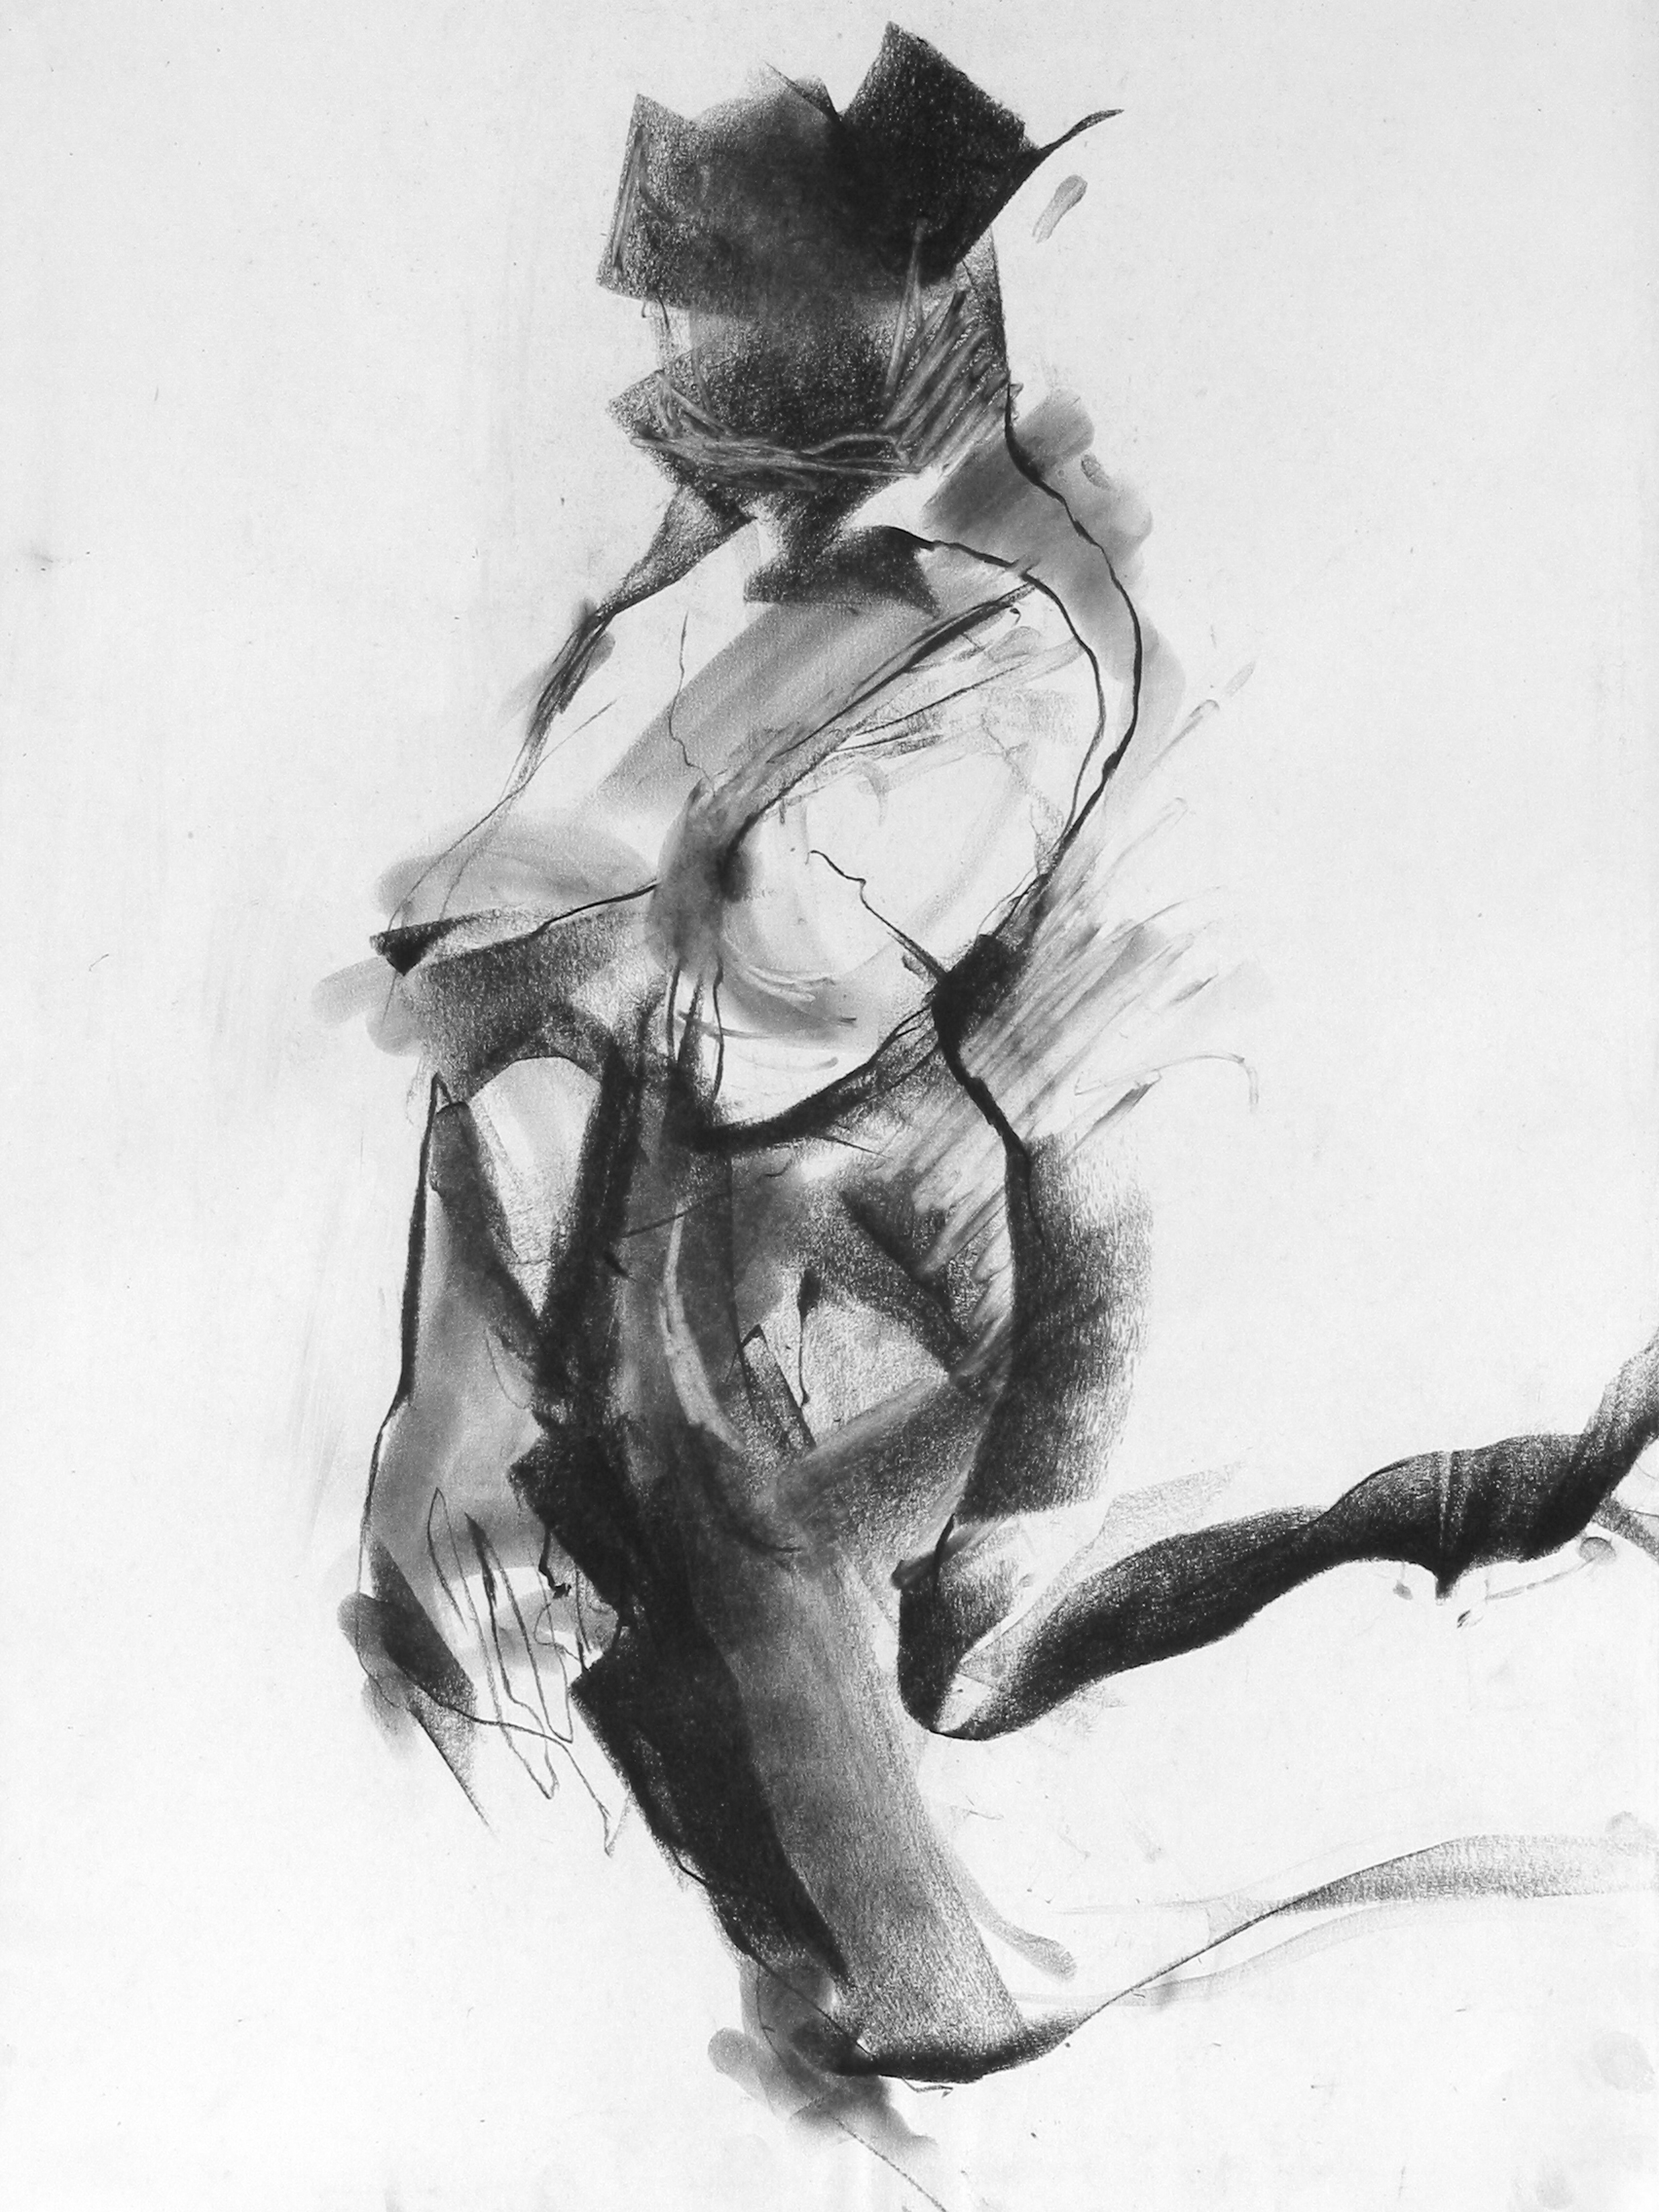  Charcoal on Paper  18” x 24” 